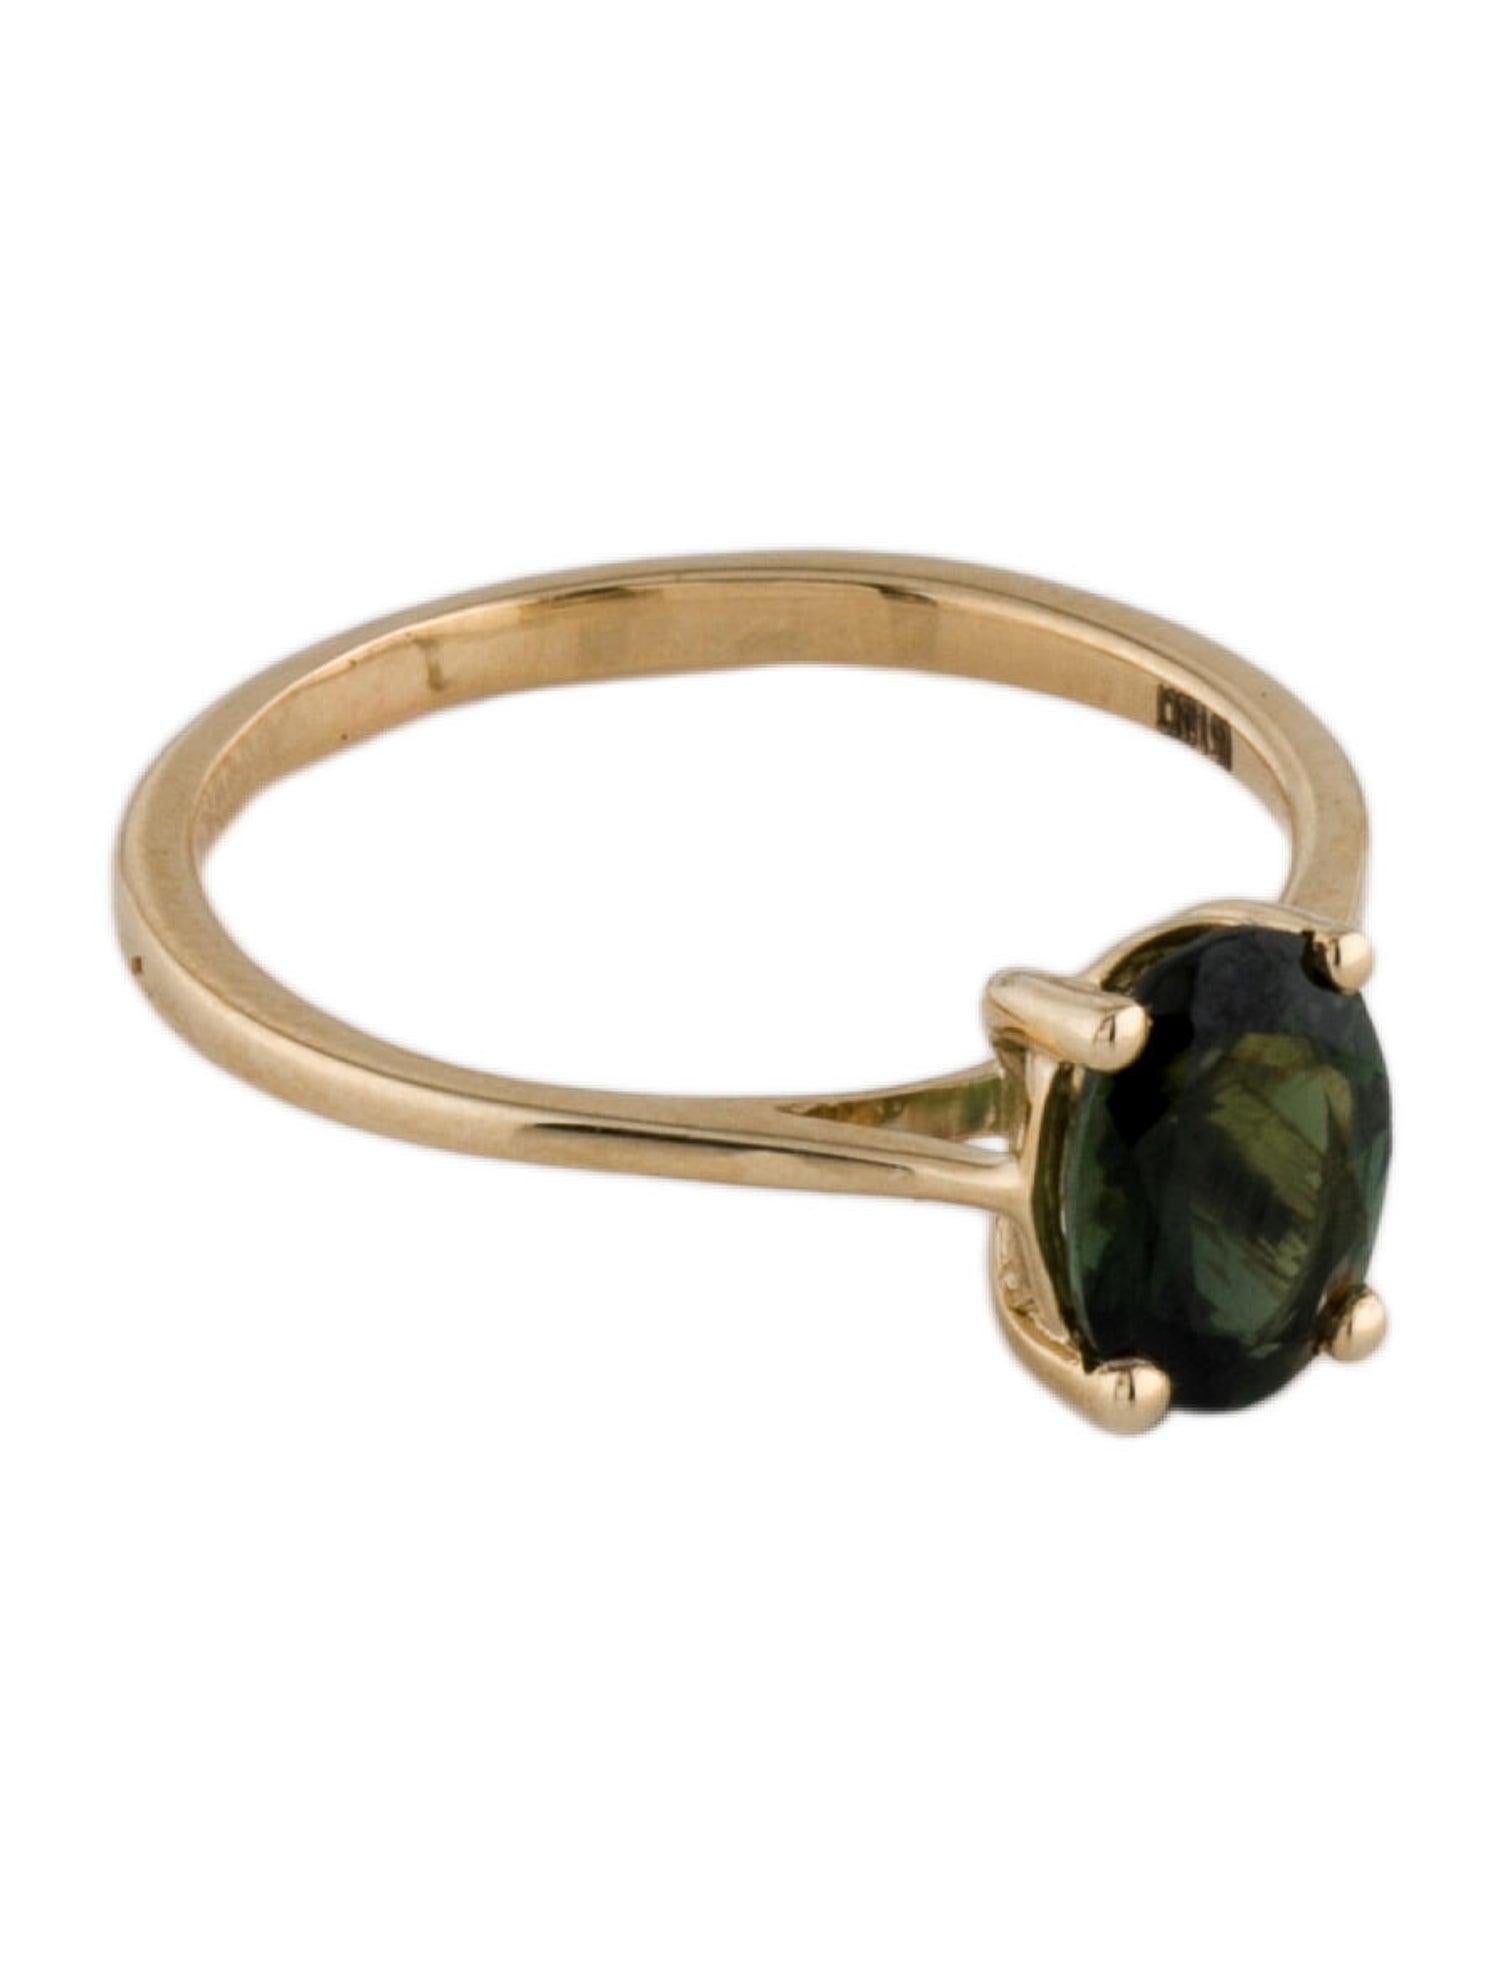 Immerse yourself in the mesmerizing allure of our Rainbow Gemstone Radiance Green Tourmaline Ring from the Jeweltique collection. This exquisite piece is a celebration of nature's diverse beauty, capturing the enchanting kaleidoscope of colors found